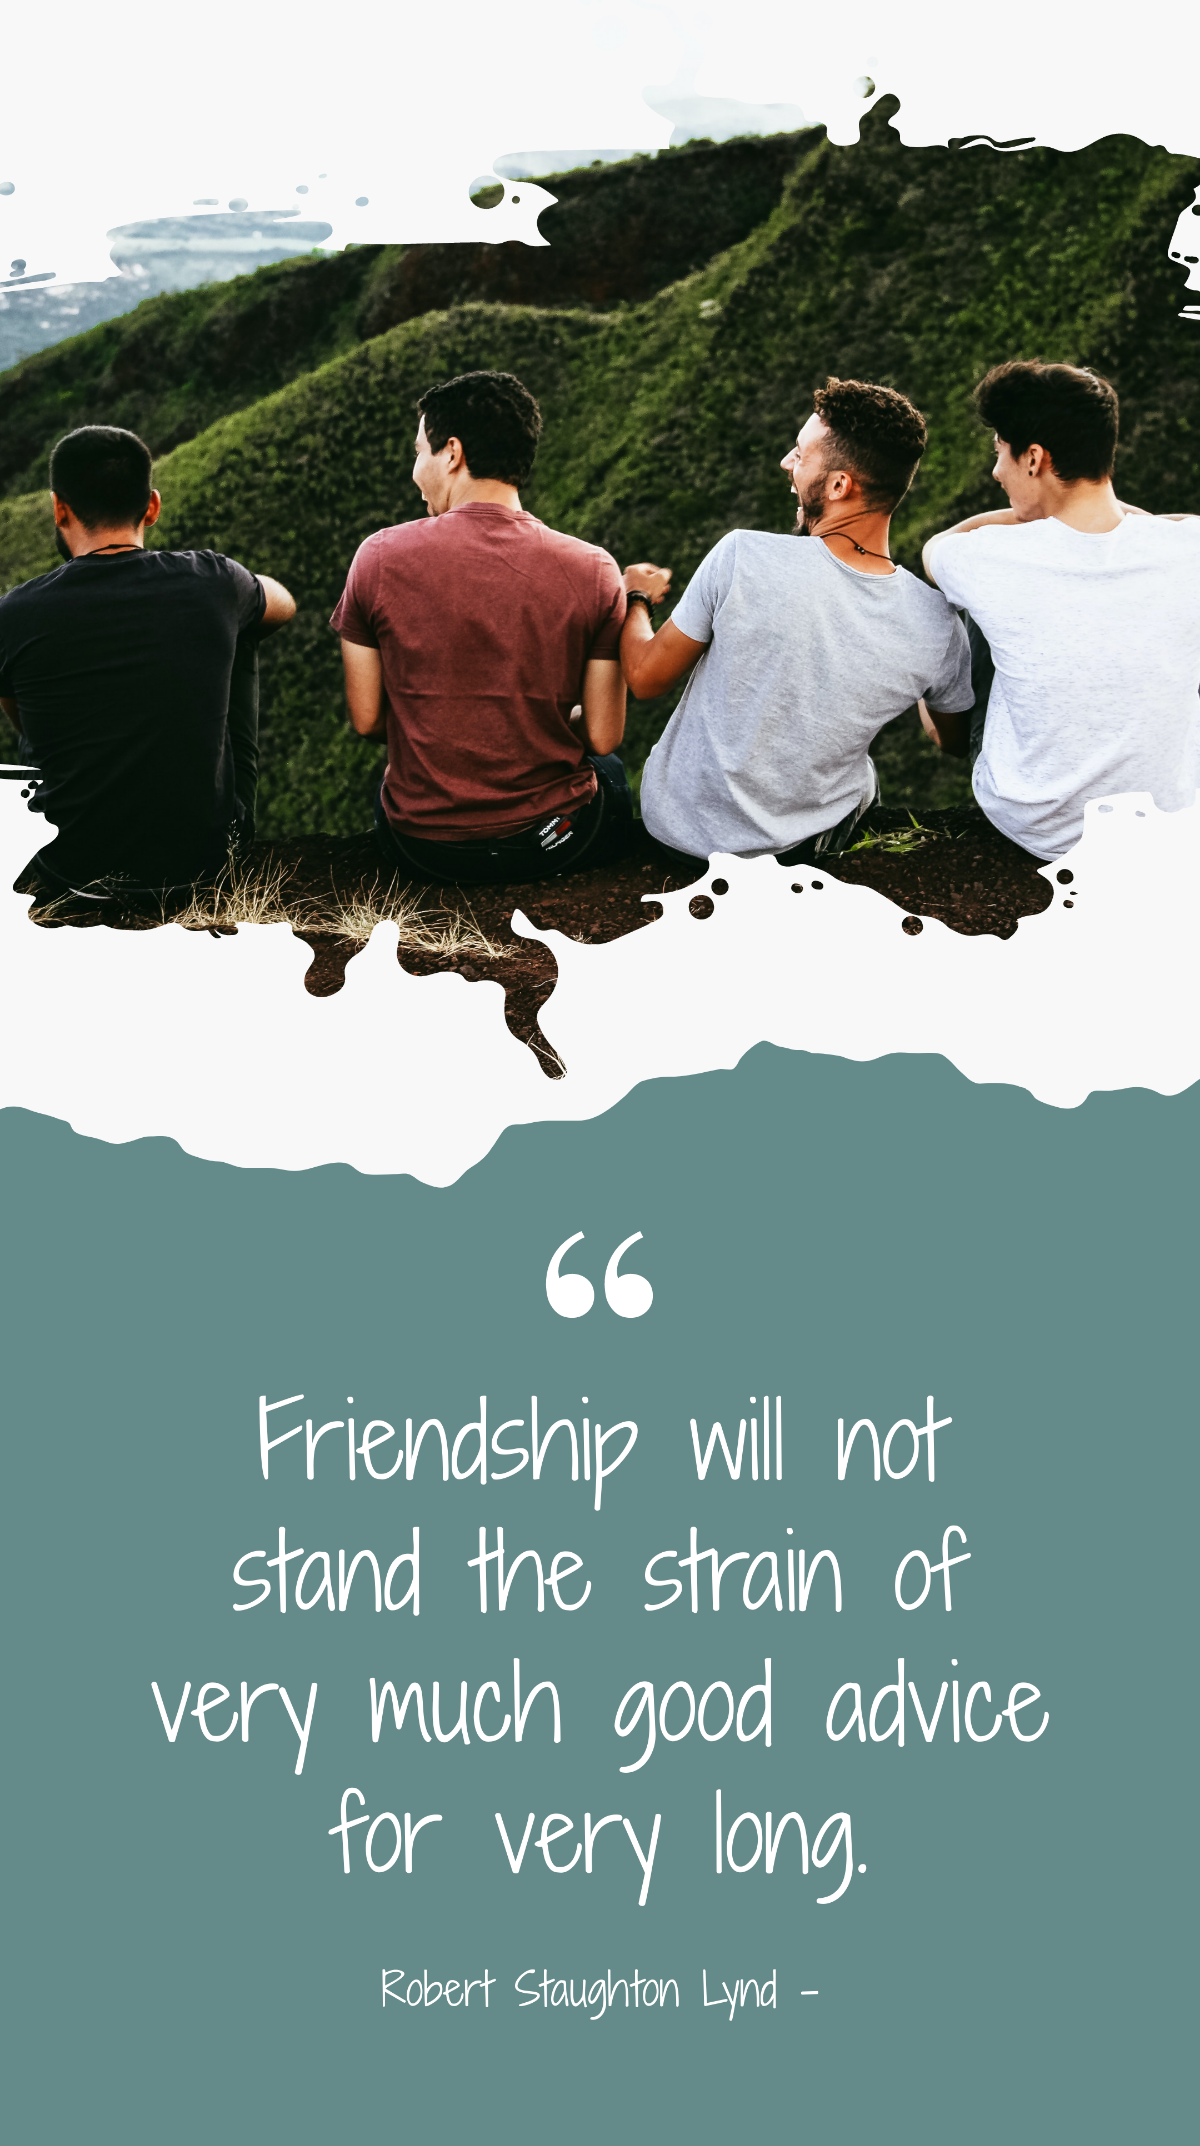 Robert Staughton Lynd - Friendship will not stand the strain of very much good advice for very long. Template